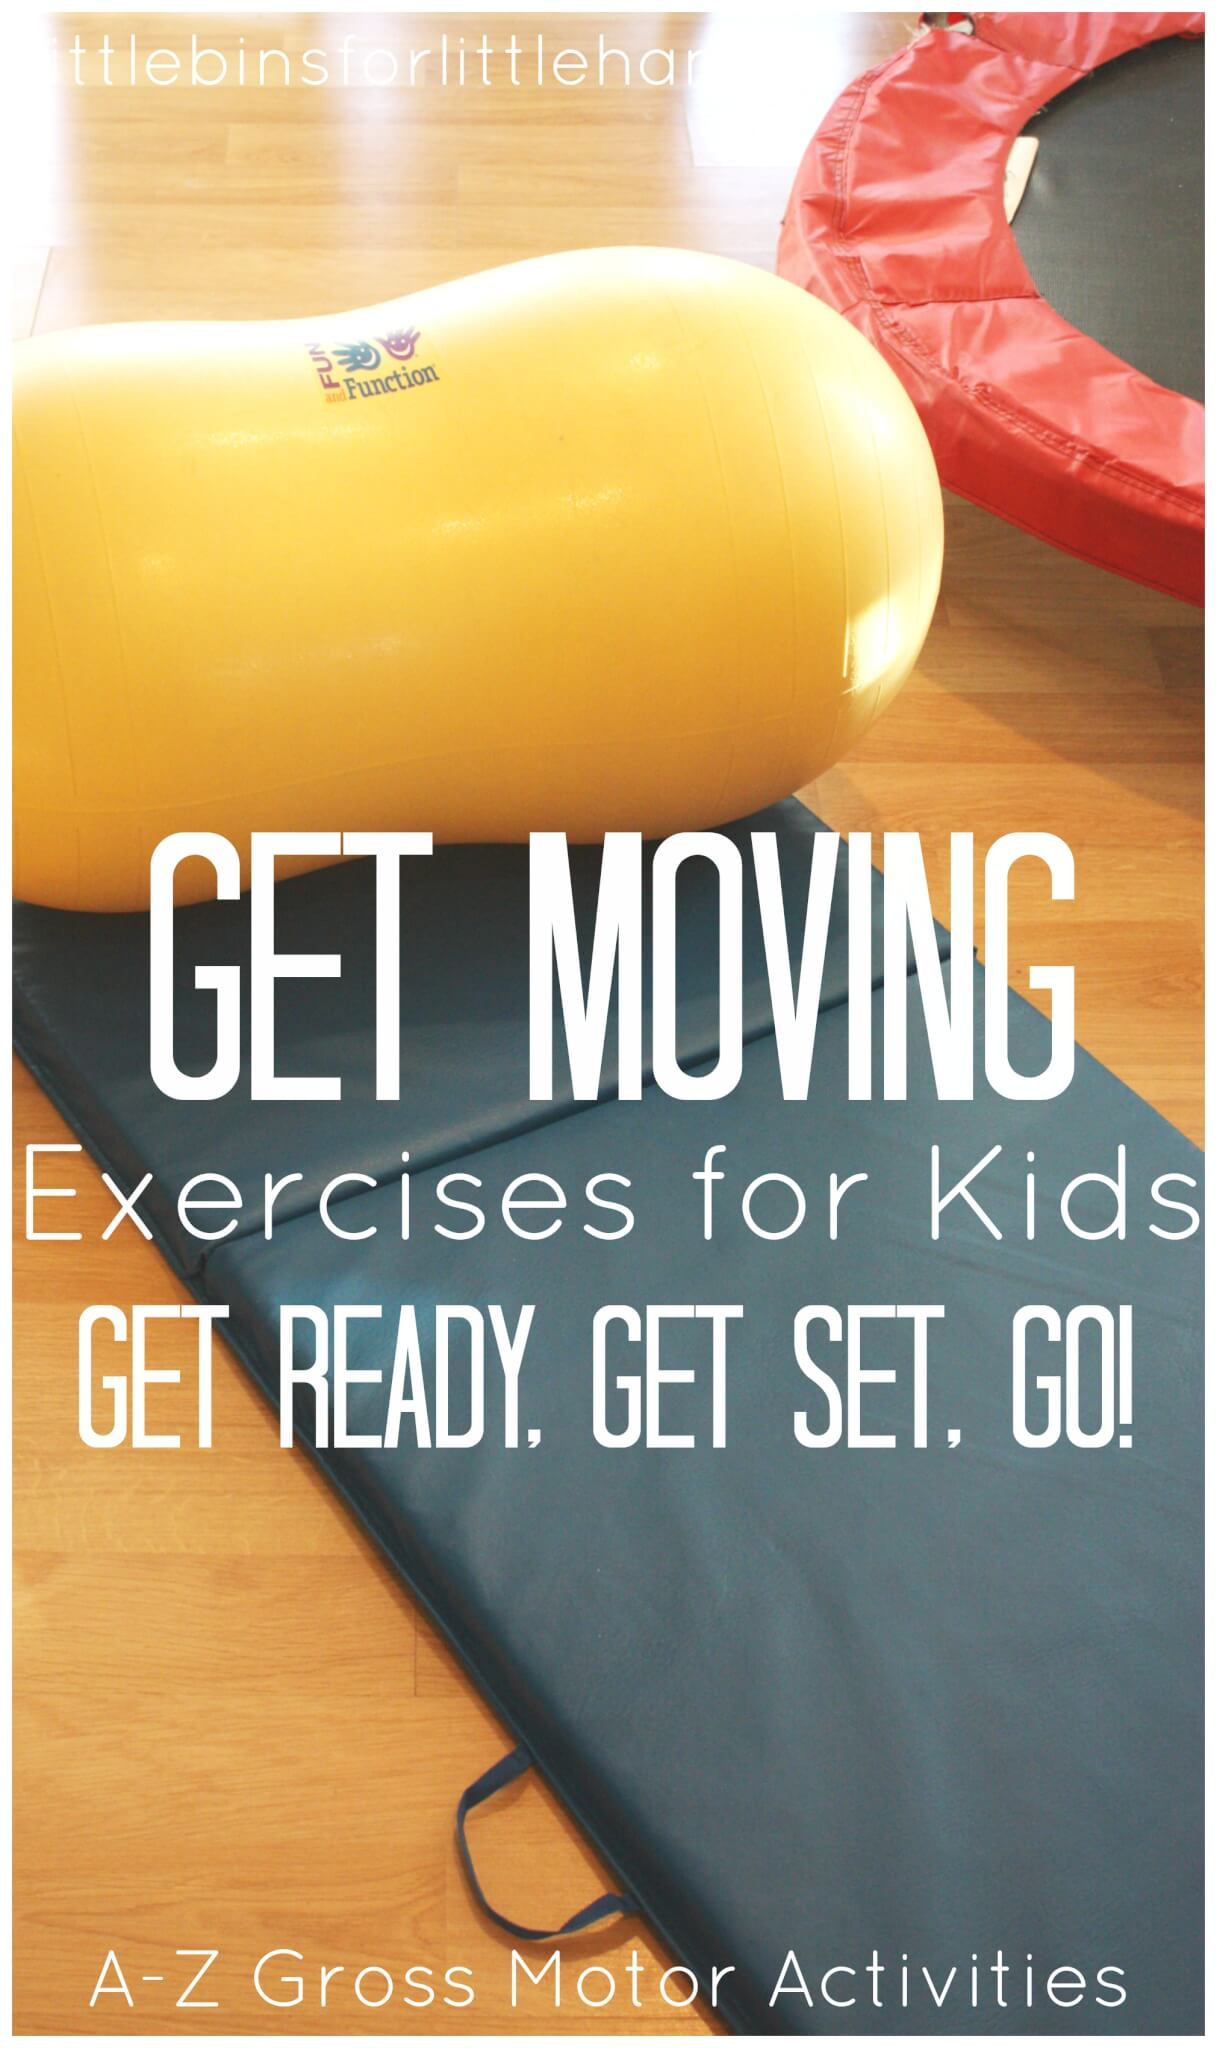 Indoor Exercise For Kids
 Fun Exercises For Kids